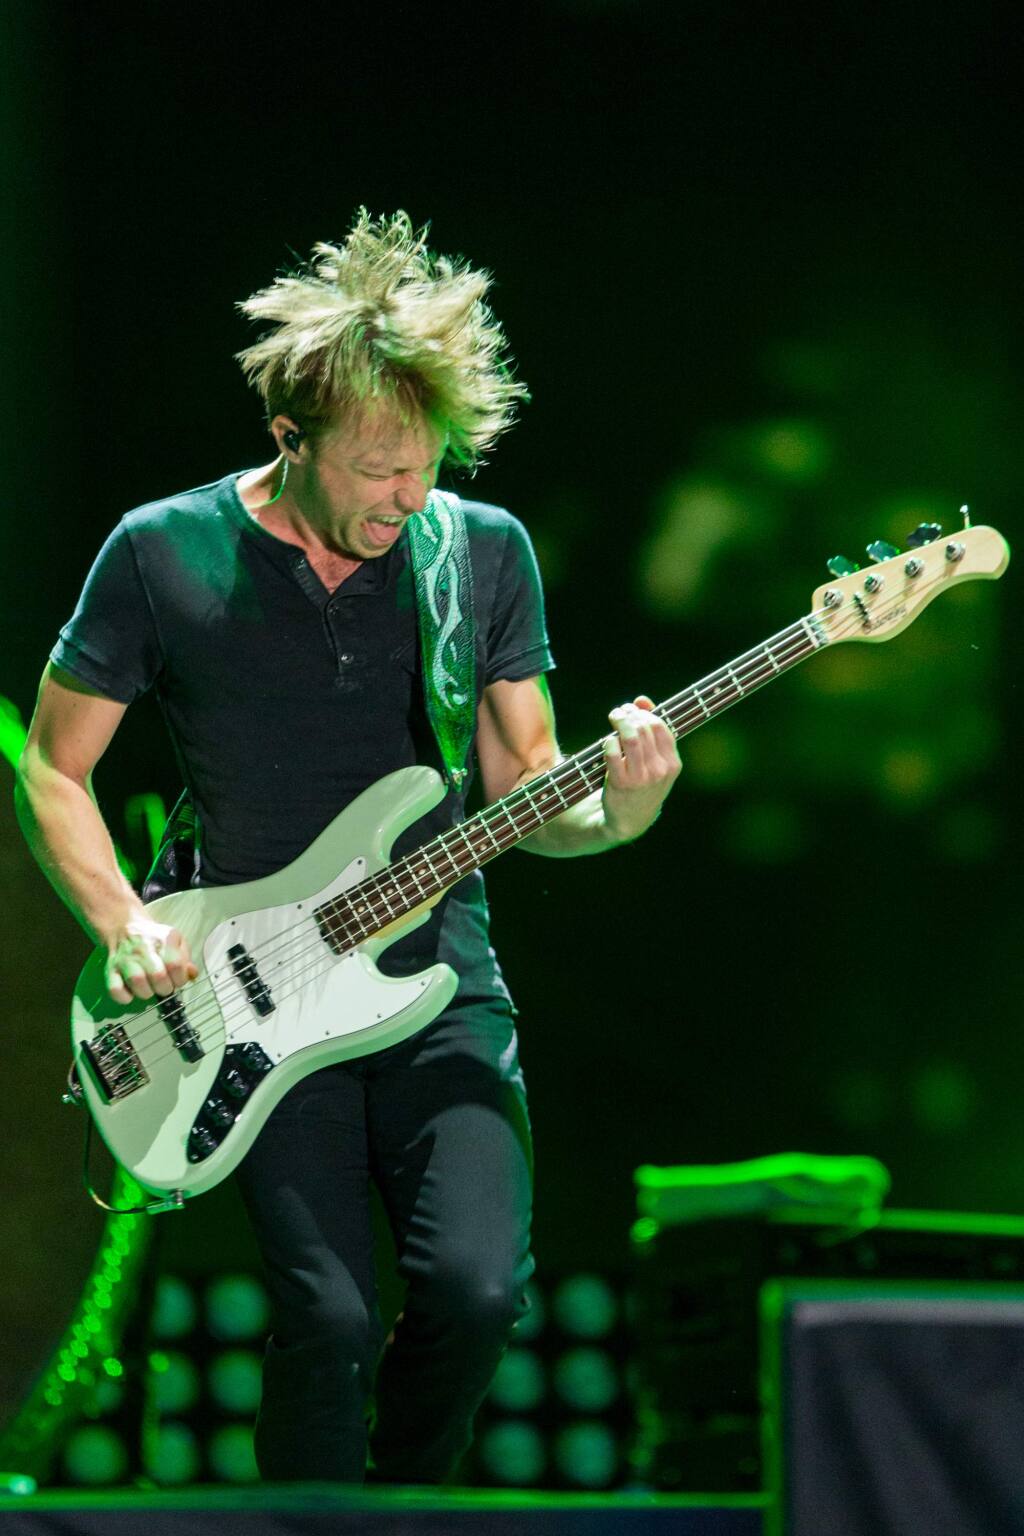 Ben McKee of Imagine Dragons perform on stage during the Made In America Festival at Grand Park on Saturday, August 30, 2014, in Los Angeles, Calif. (Photo by Paul A. Hebert/Invision/AP)